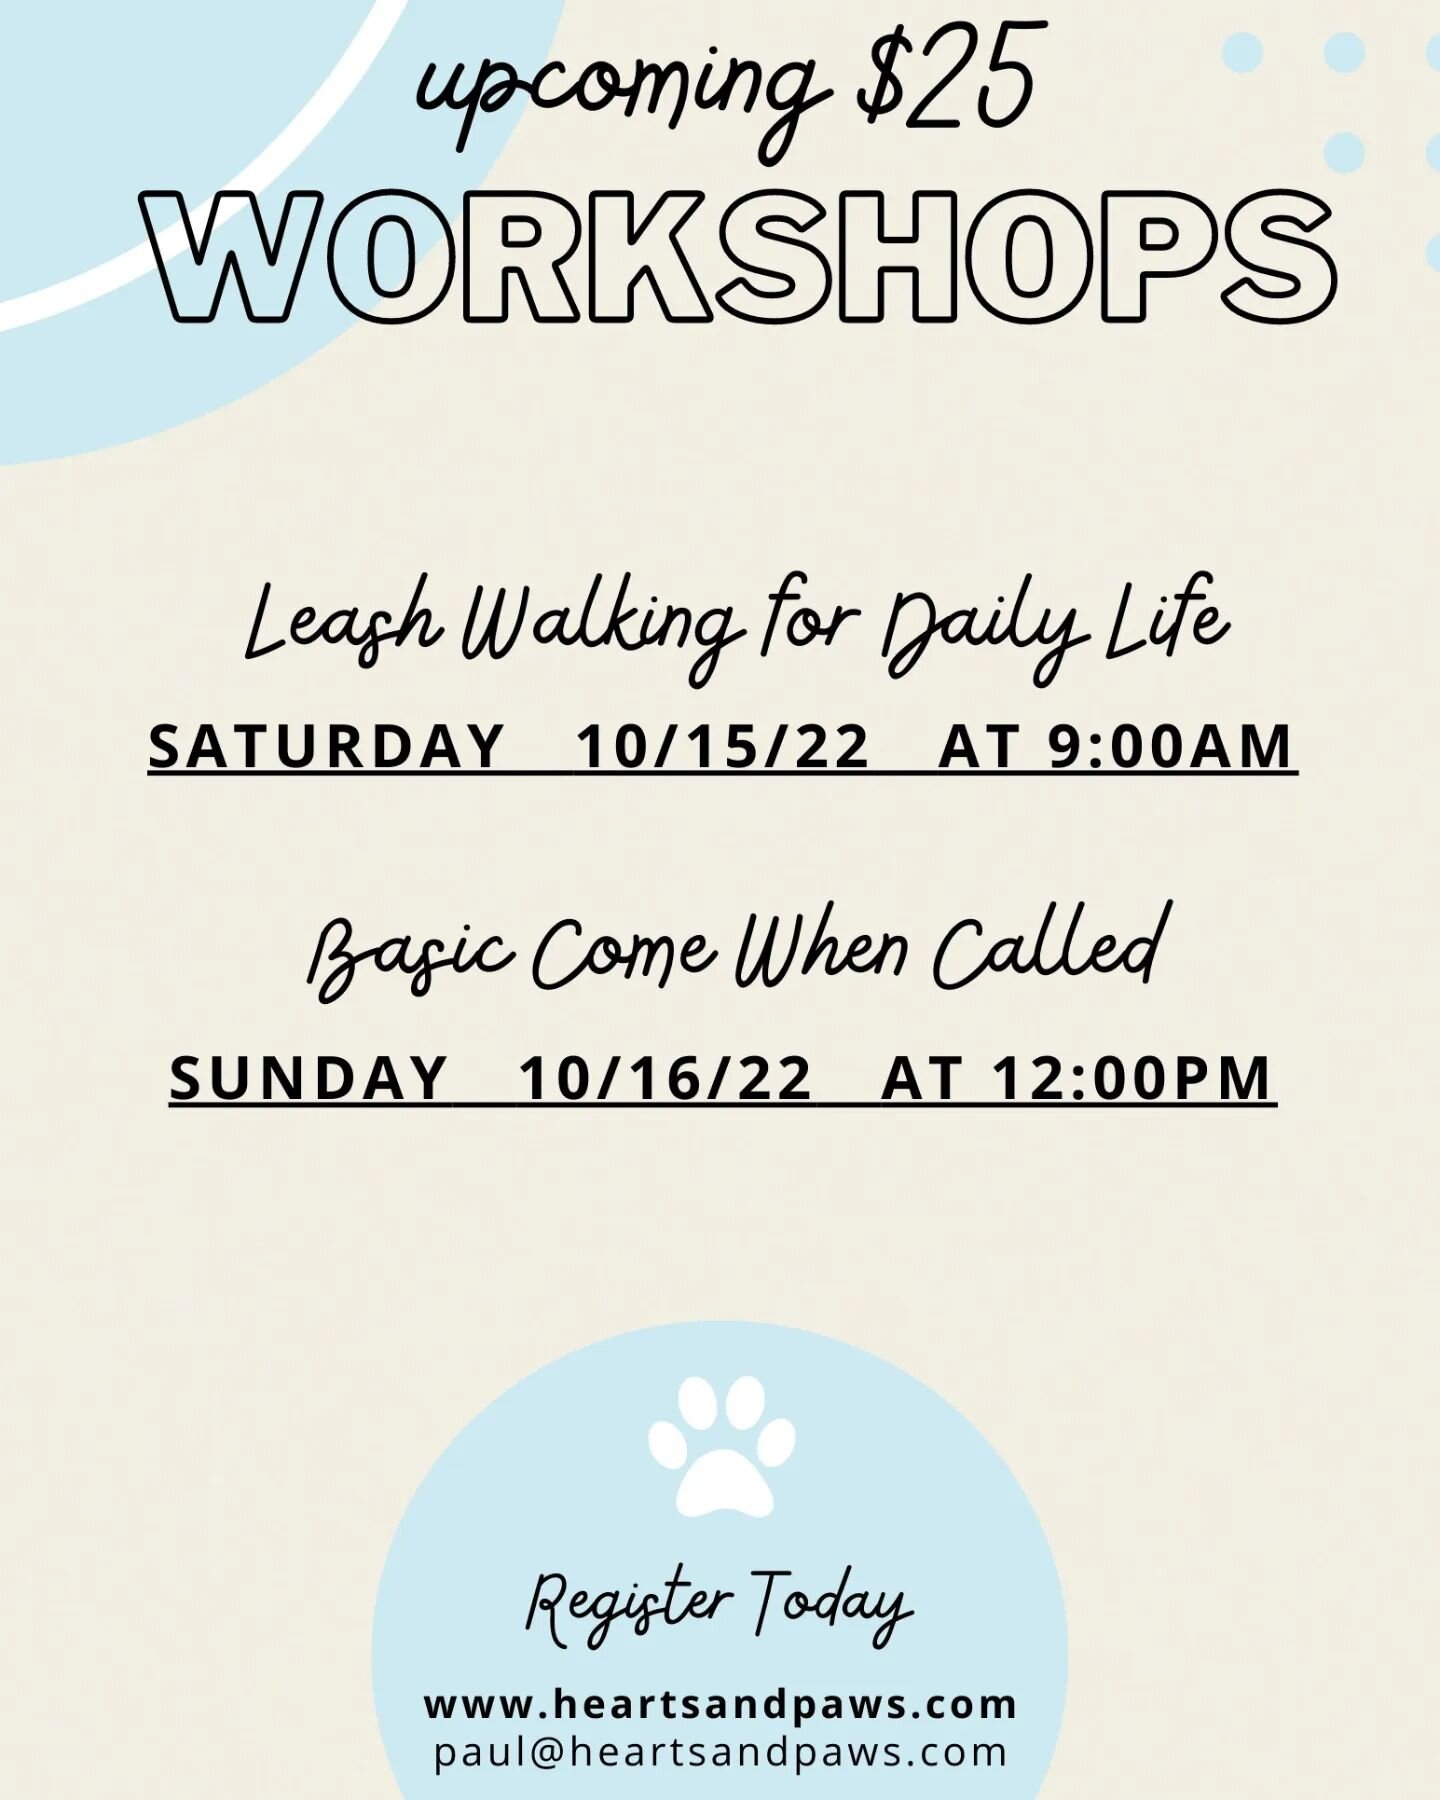 Hey there, pet parents!🐶
Are you looking to advance your leash walking skills? Need to know how to build a reliable recall?
Look no further- our $25 weekend workshops are back and better than ever!
Sign up today to sharpen your pups skills and have 